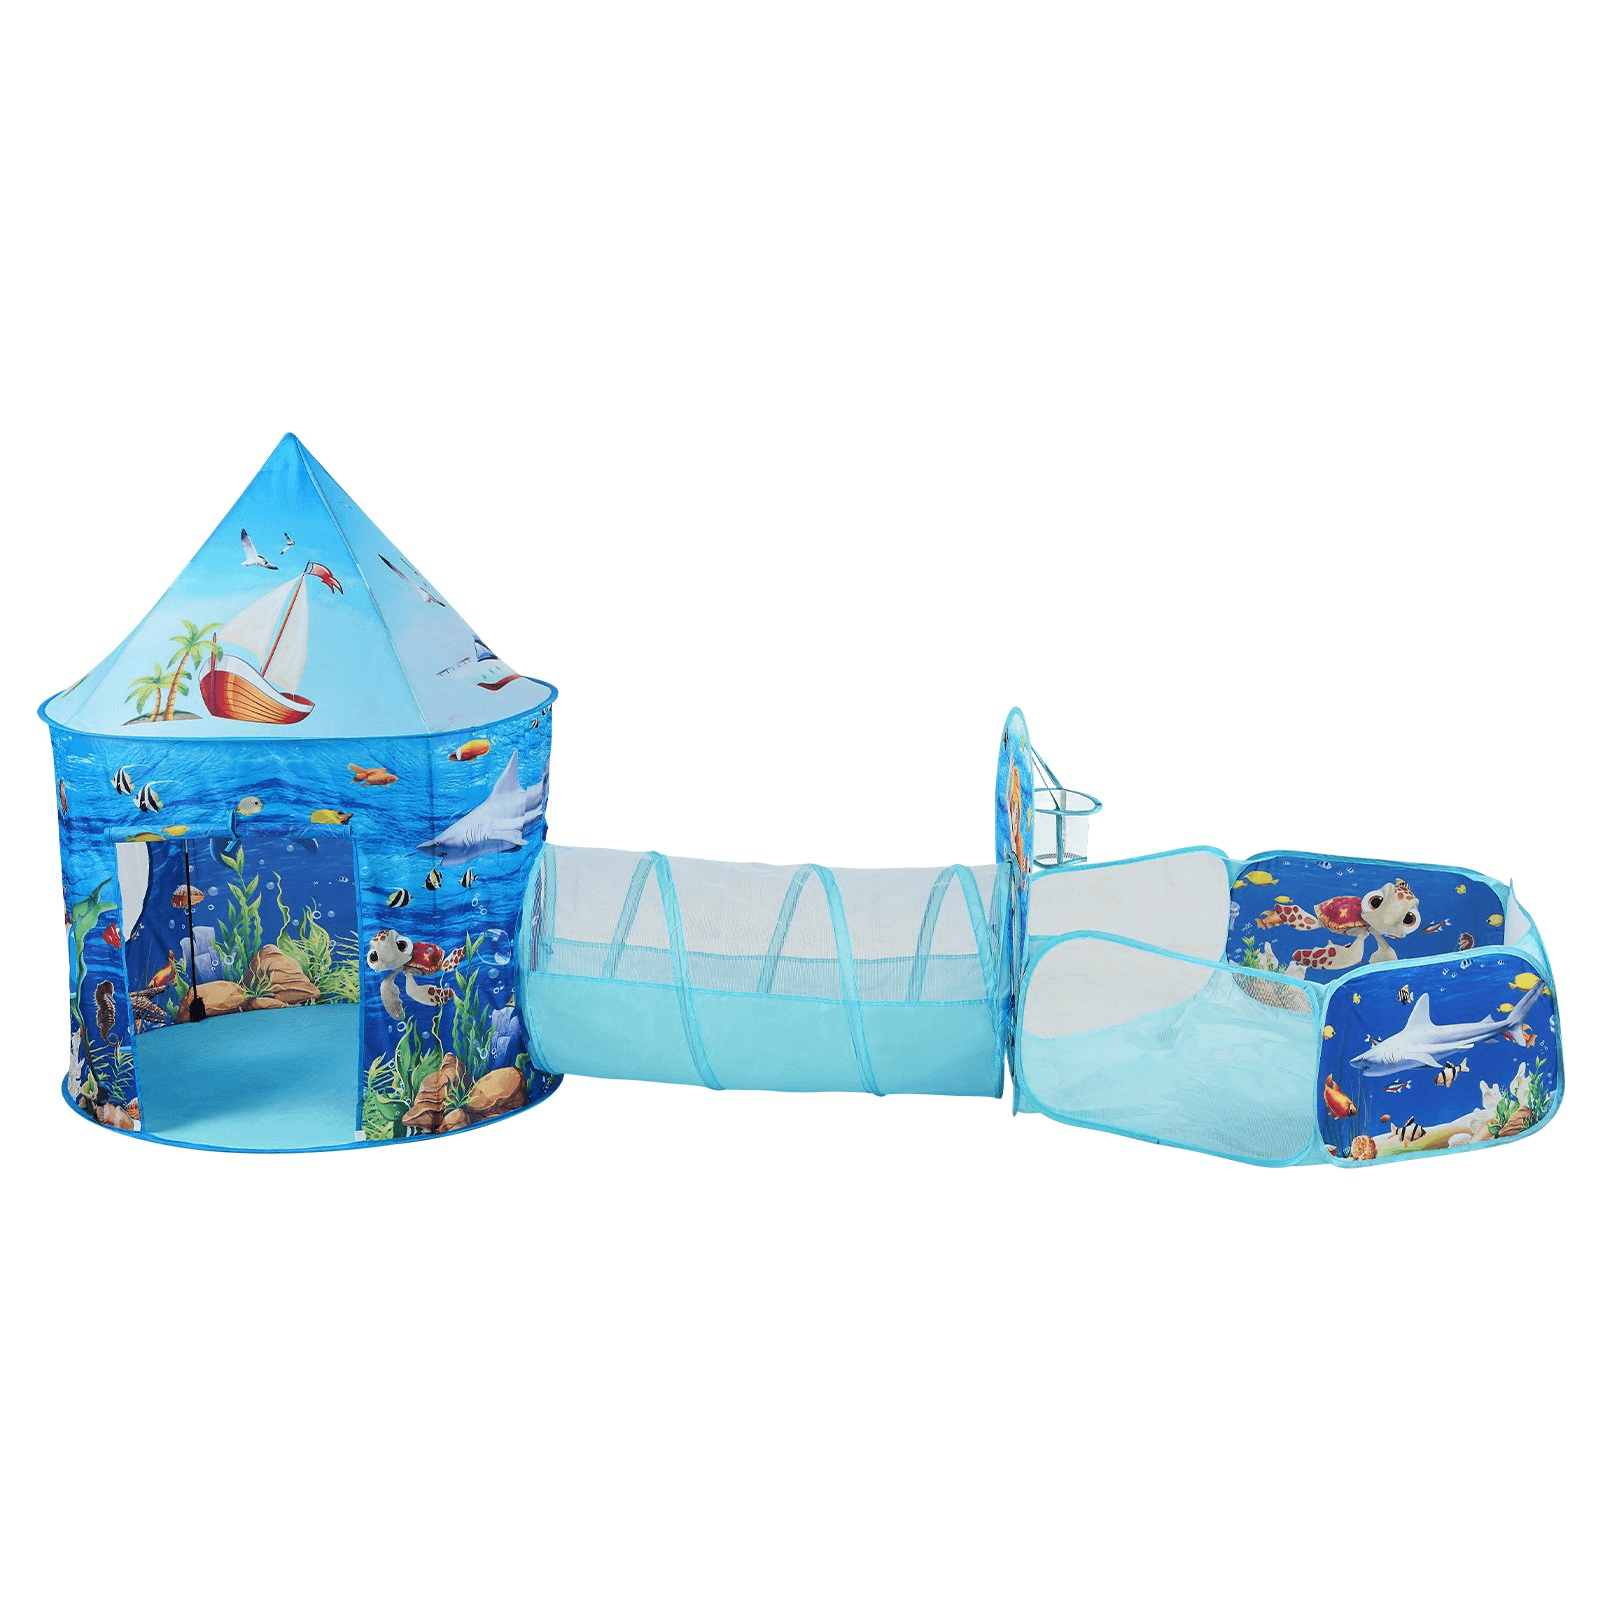 VEVOR 3 in 1 Kids Play Tent with Tunnel, Basketball Hoop for Boys, Girls, Babies and Toddlers, Indoor/Outdoor Pop Up Playhouse with Carrying Bag & Banding Straps Birthday Gifts, Blue Ocean - Loomini